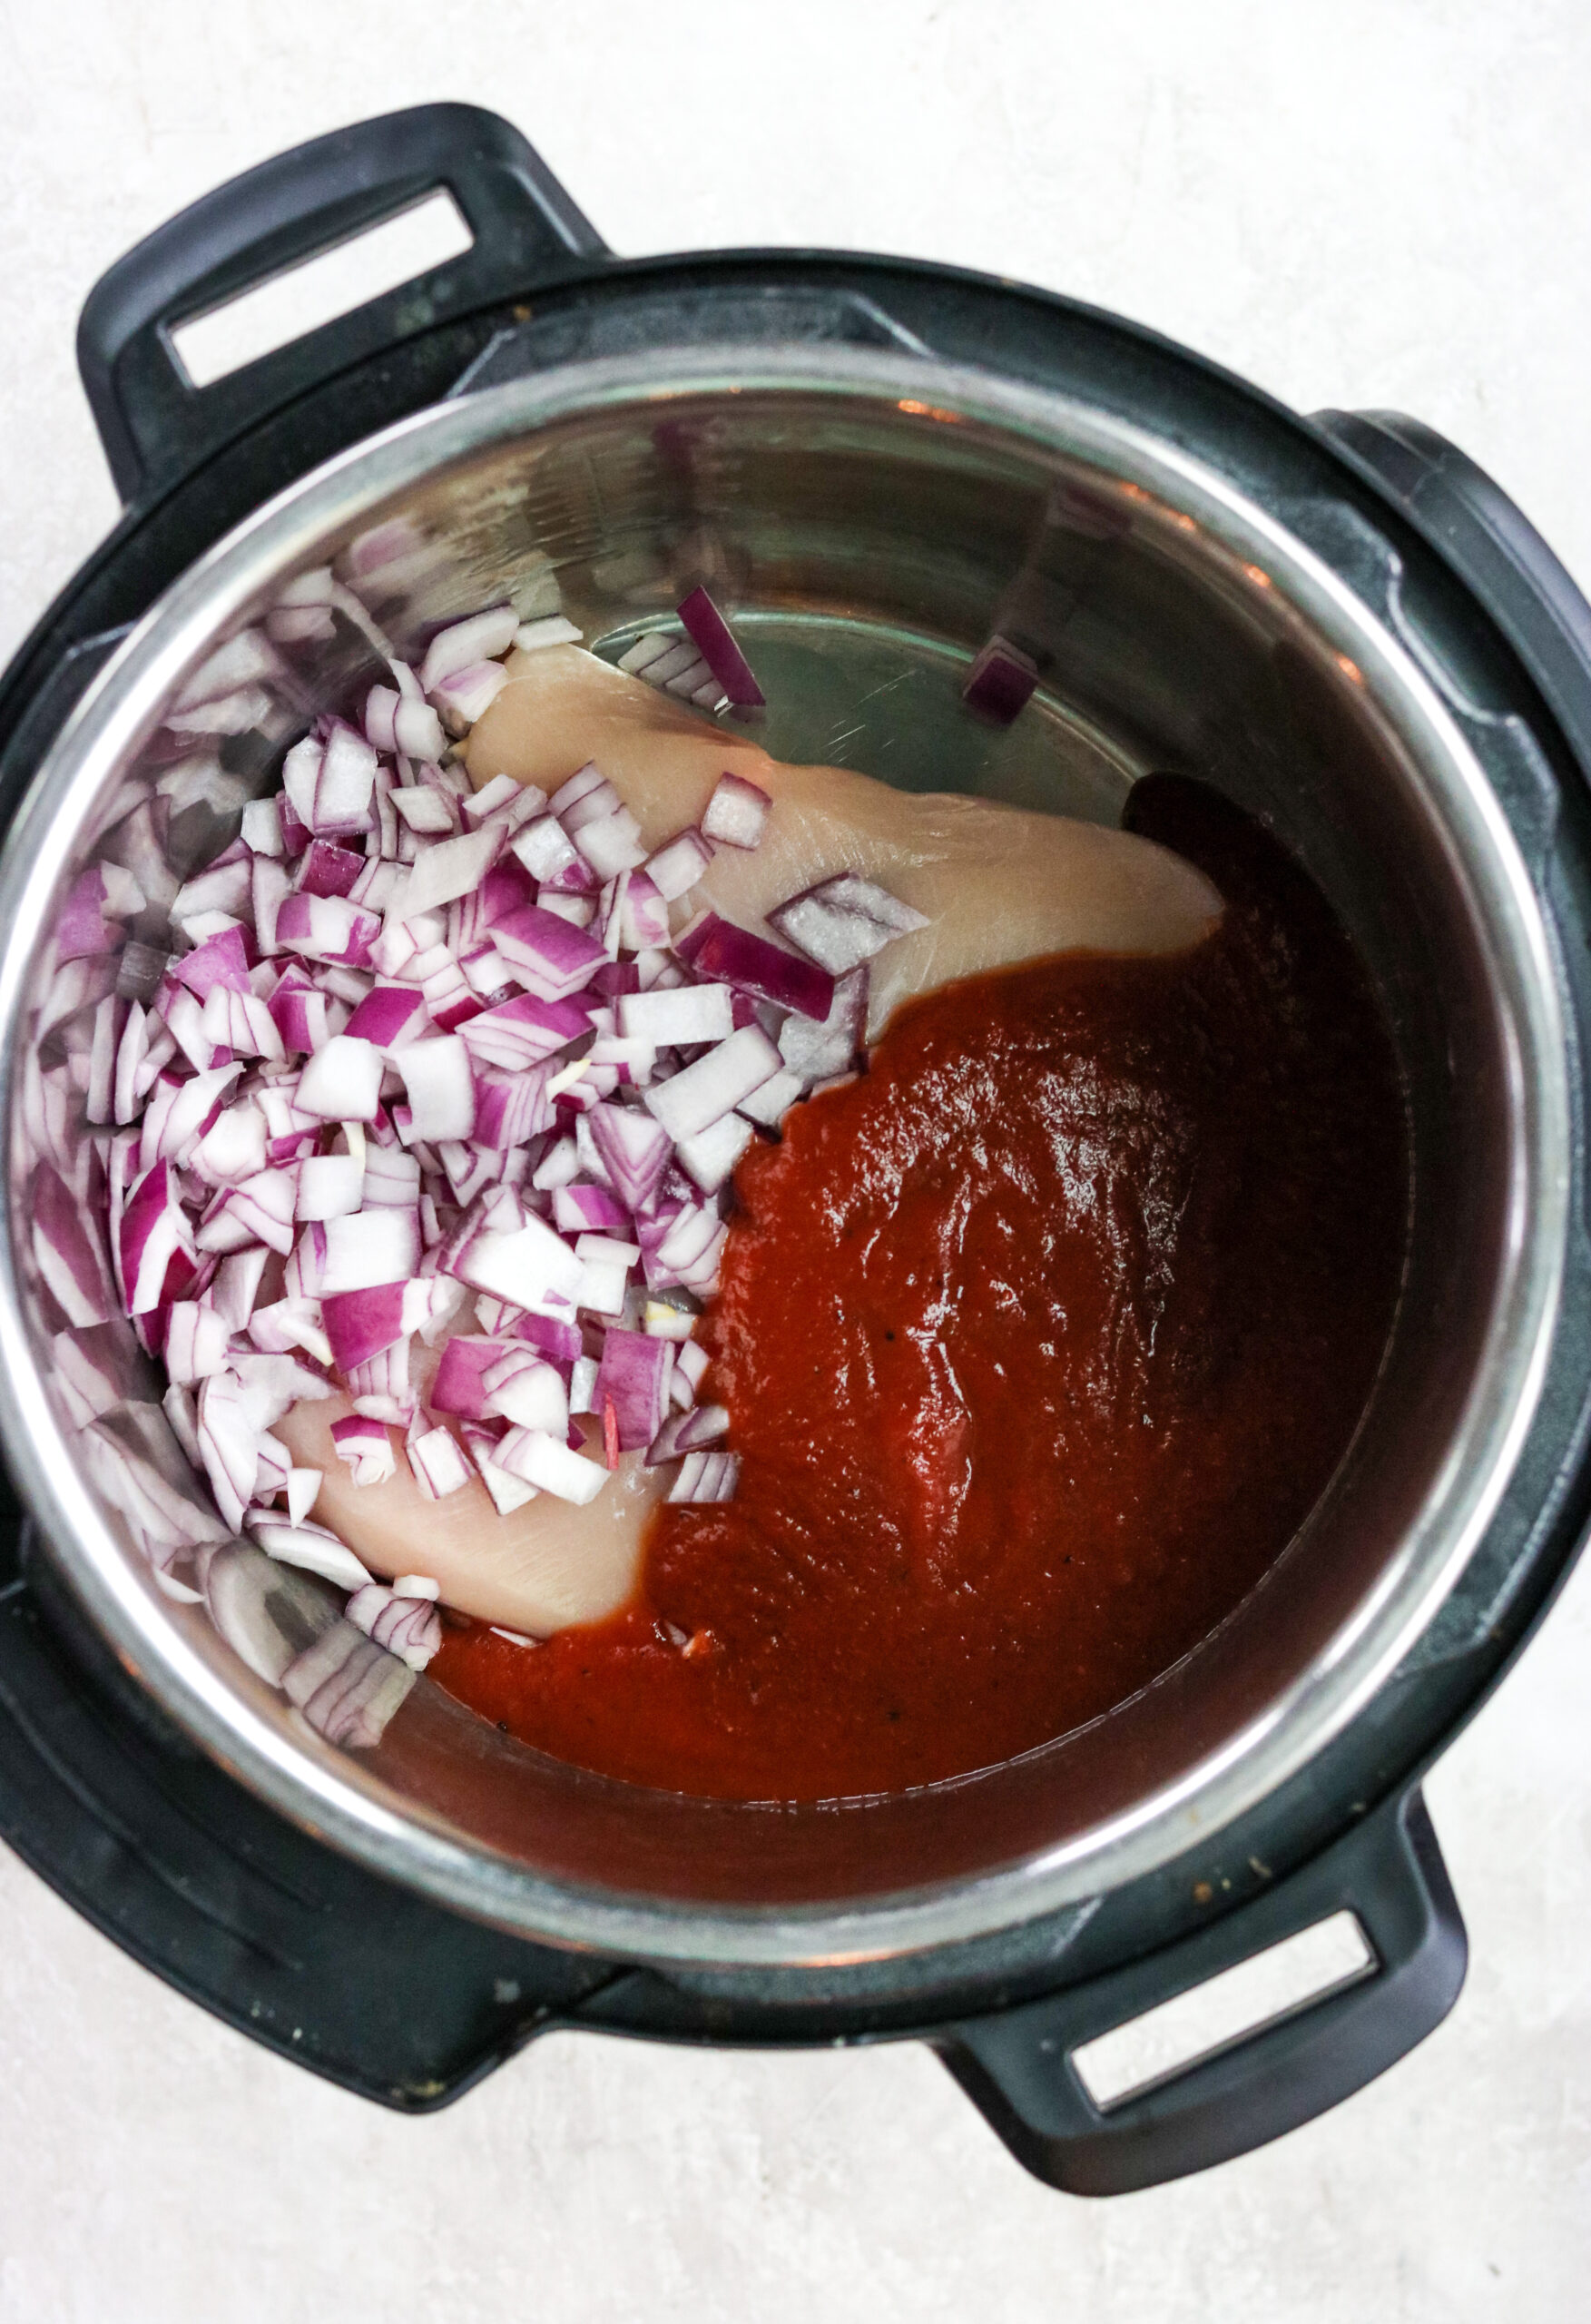 red onions, whole30 bbq sauce, and skinless boneless chicken breasts in an instant pot